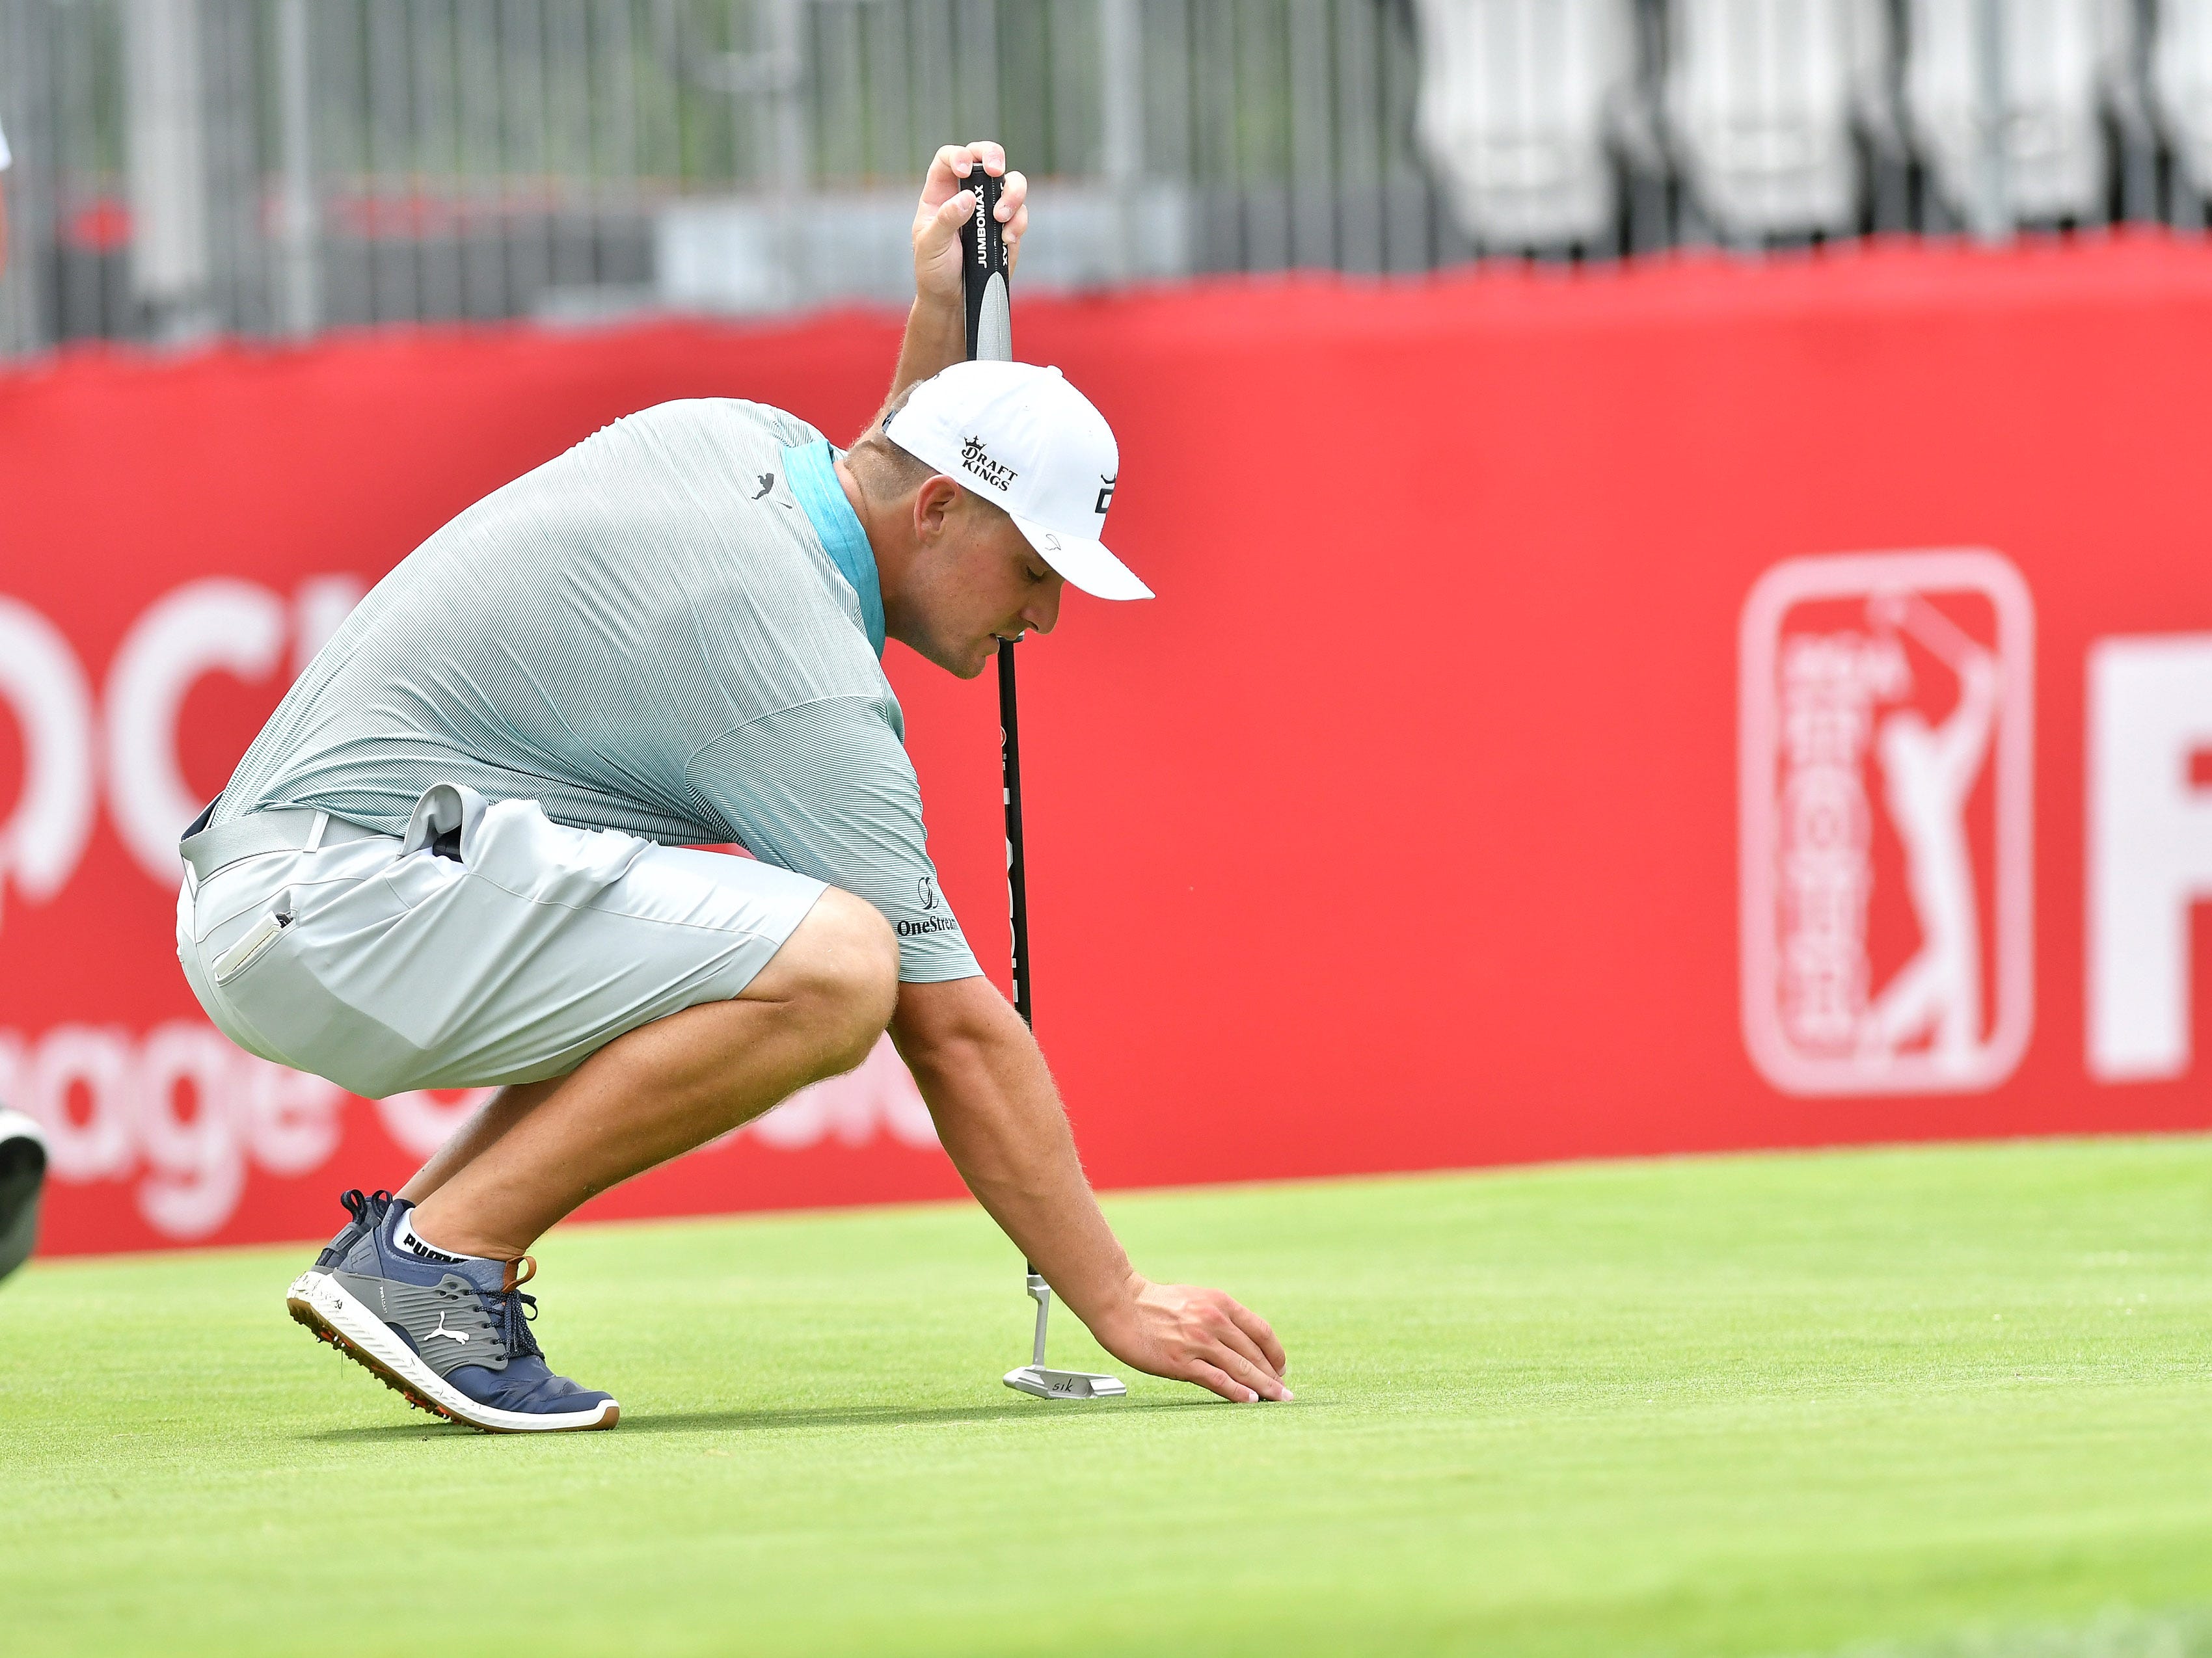 Bryson DeChambeau places his ball on the 15th green.